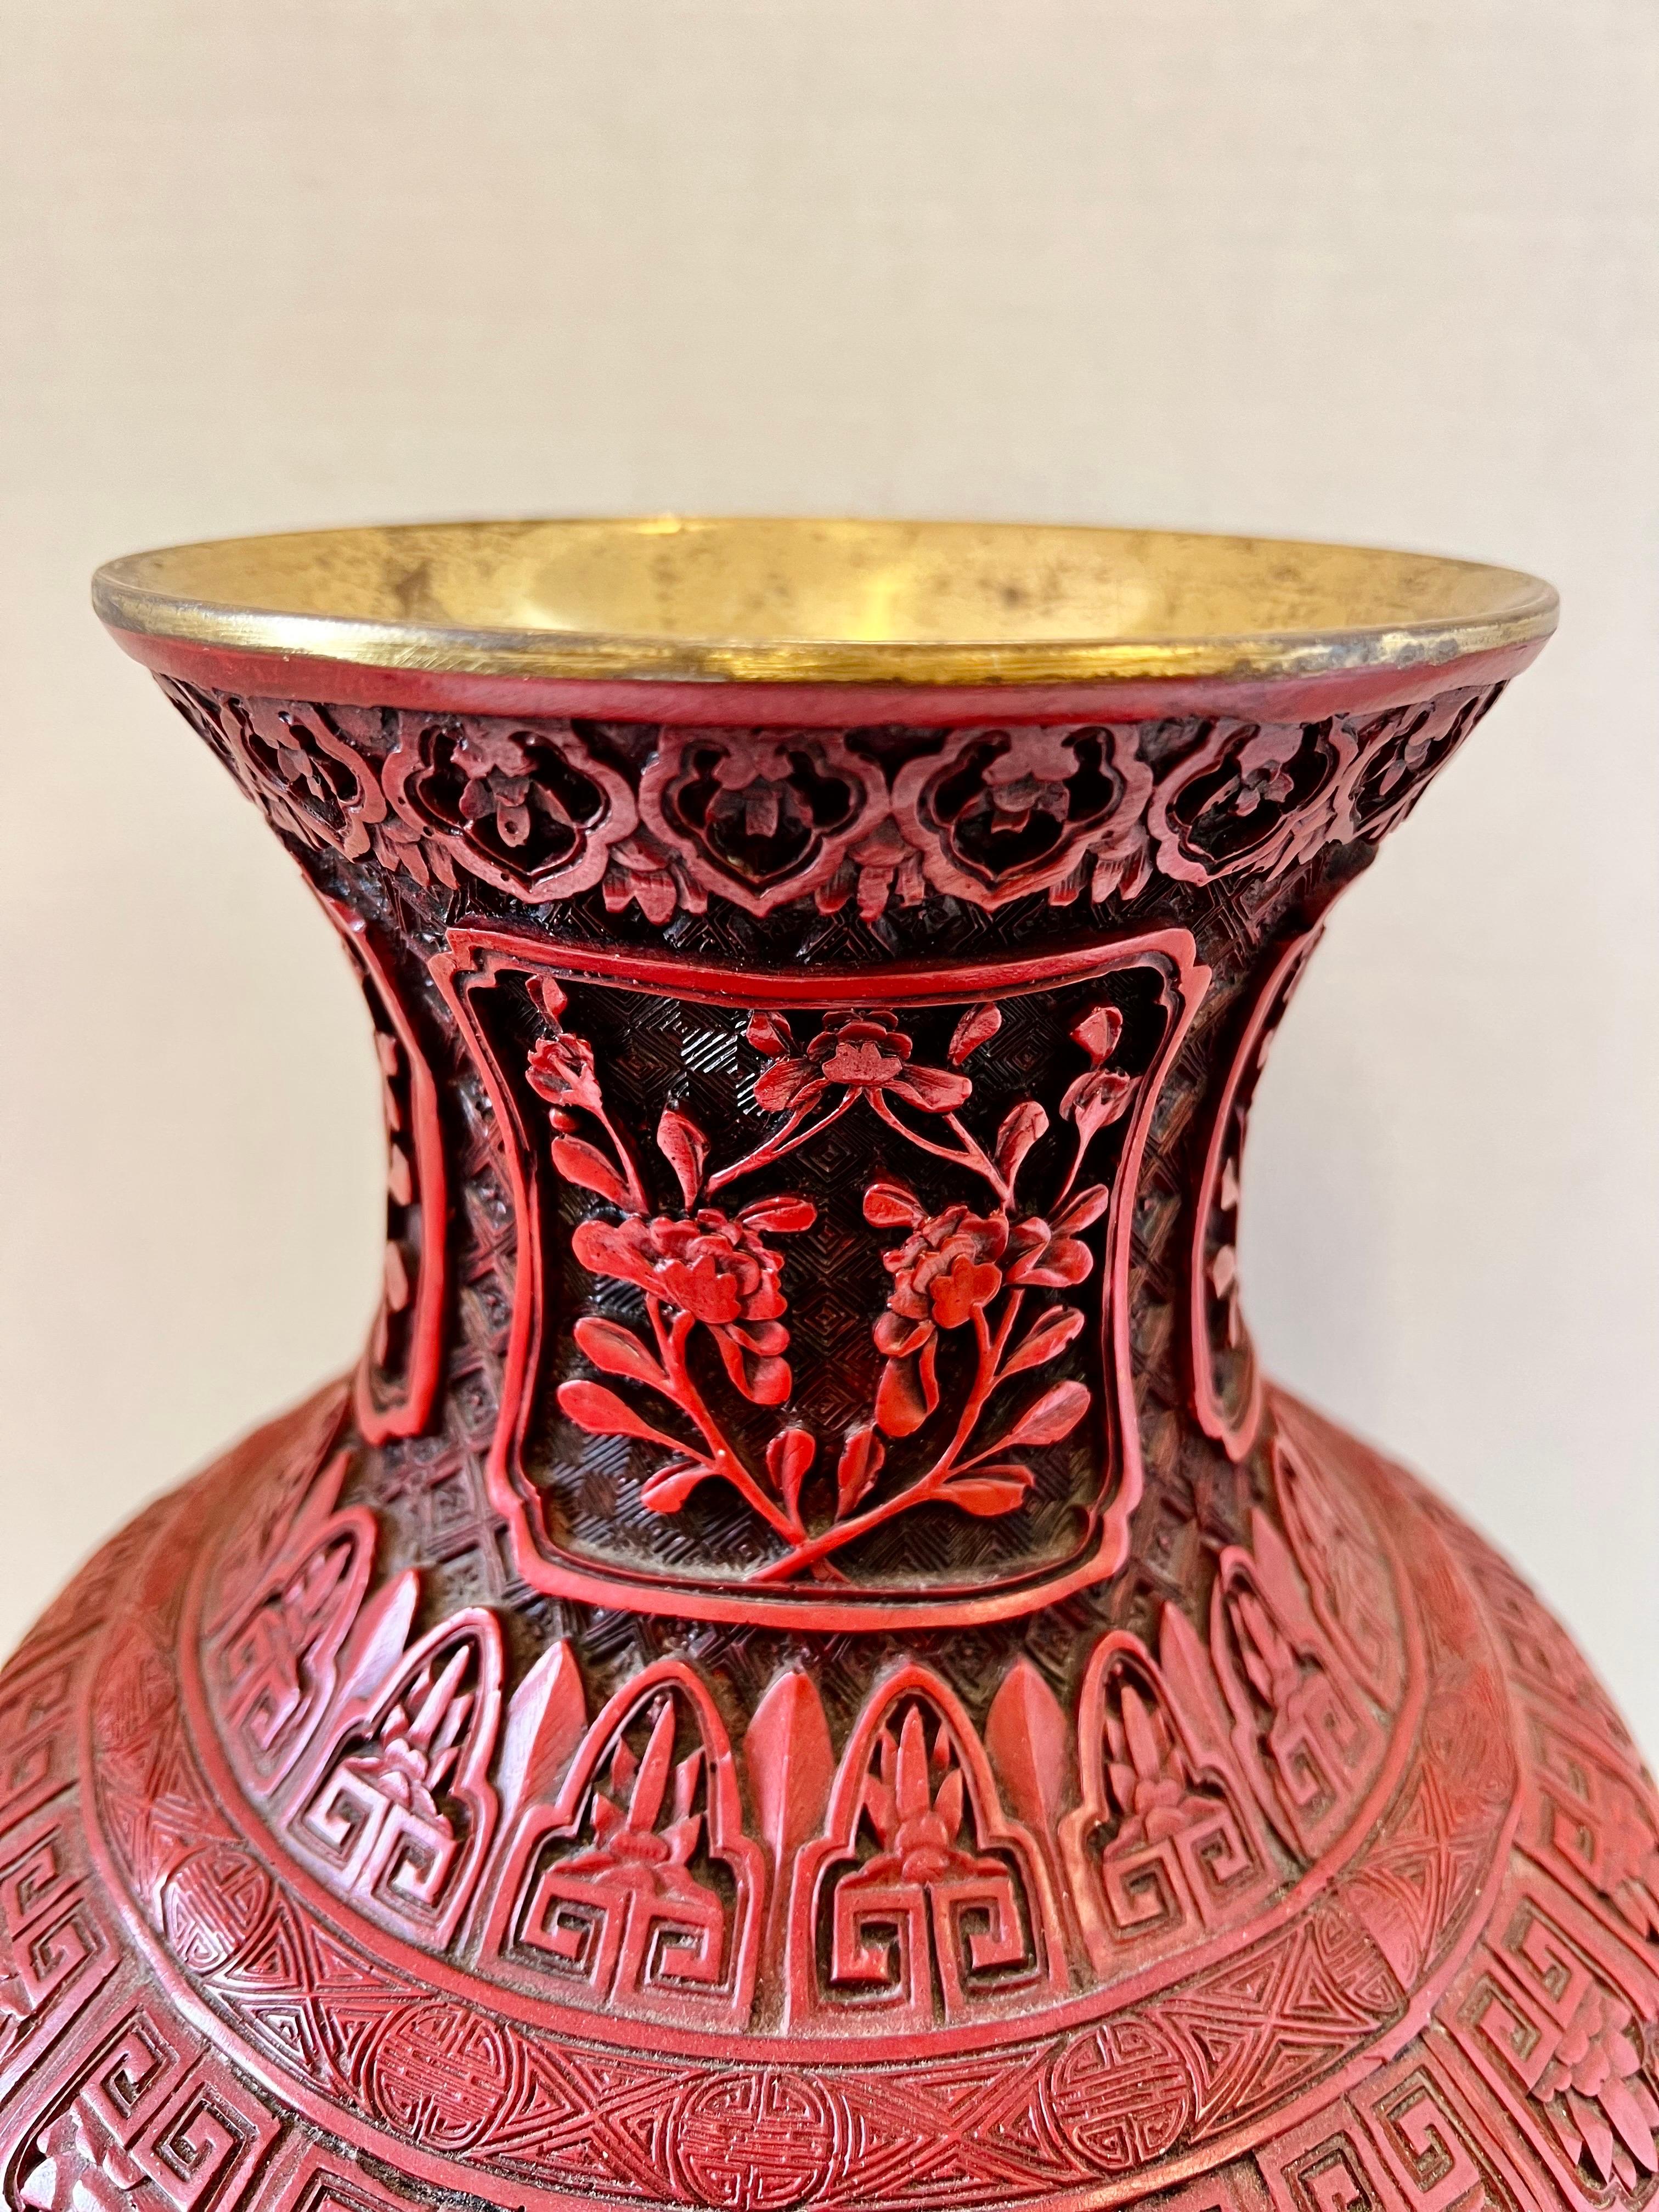 Stunning large 19”h Chinese cinnabar vase is intricately hand carved with four village scenes around the exterior. Interior is brass lined.